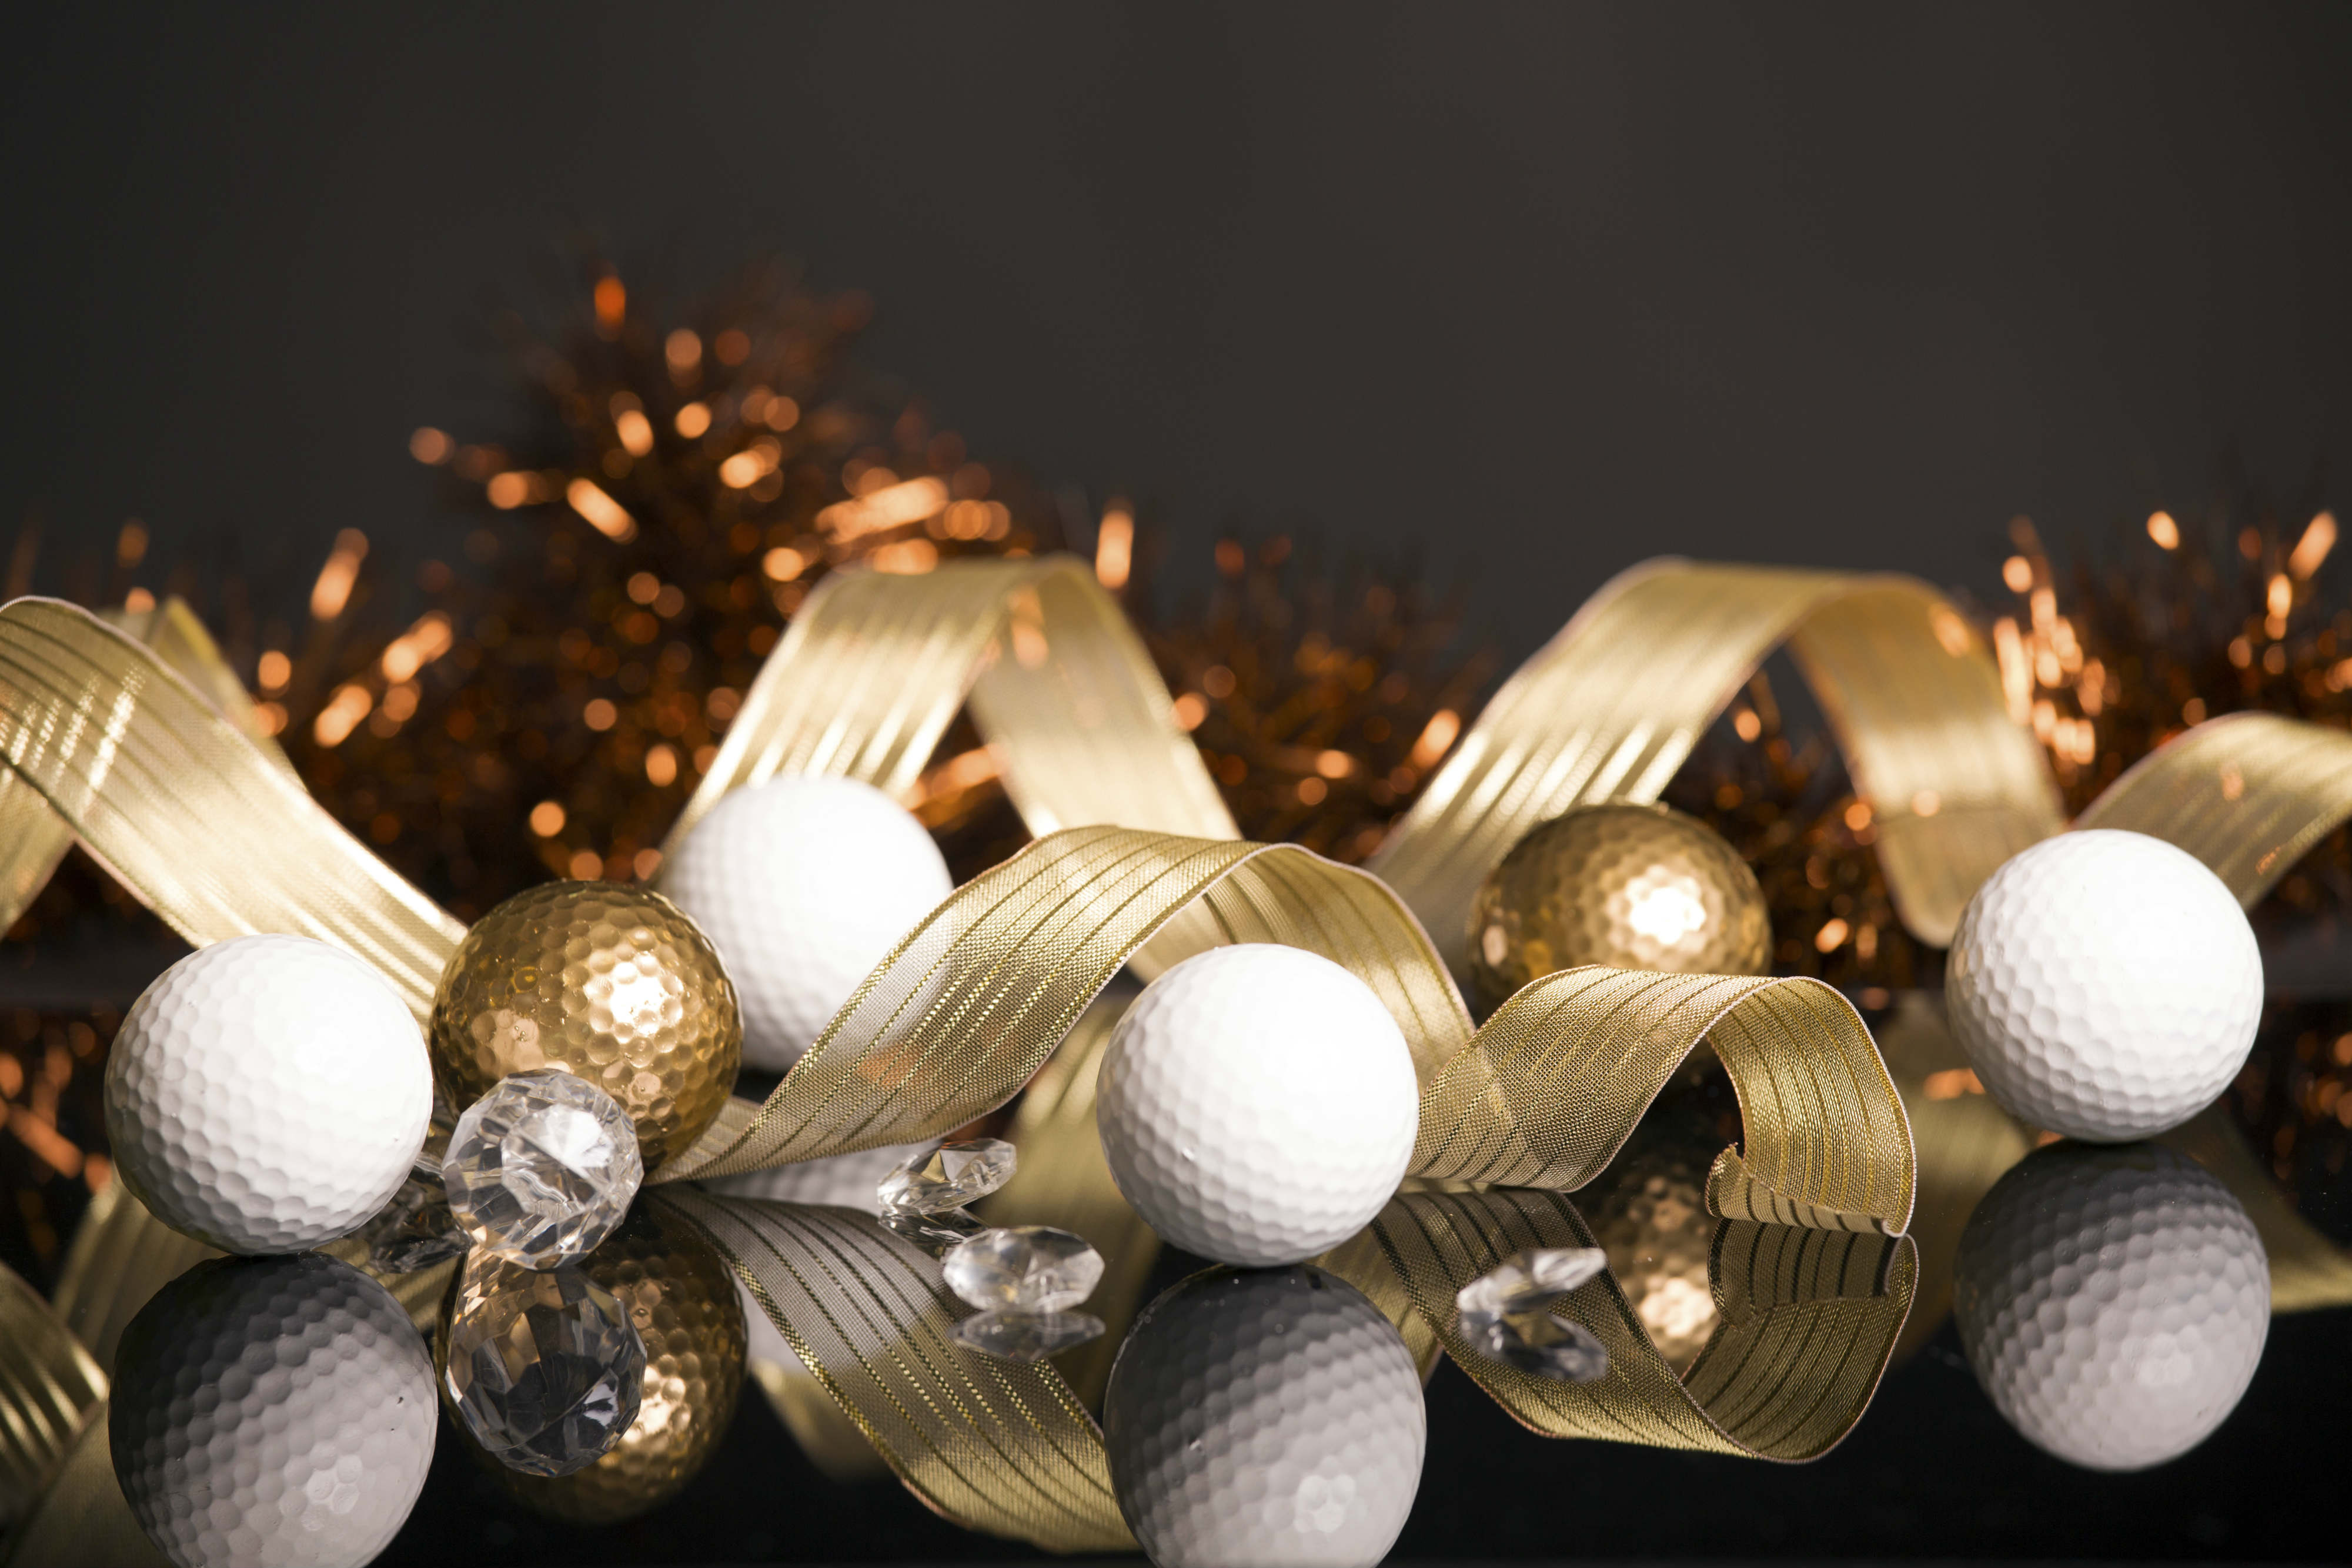 Seasons Greetings from Open Fairways and an update on our office Christmas opening times.